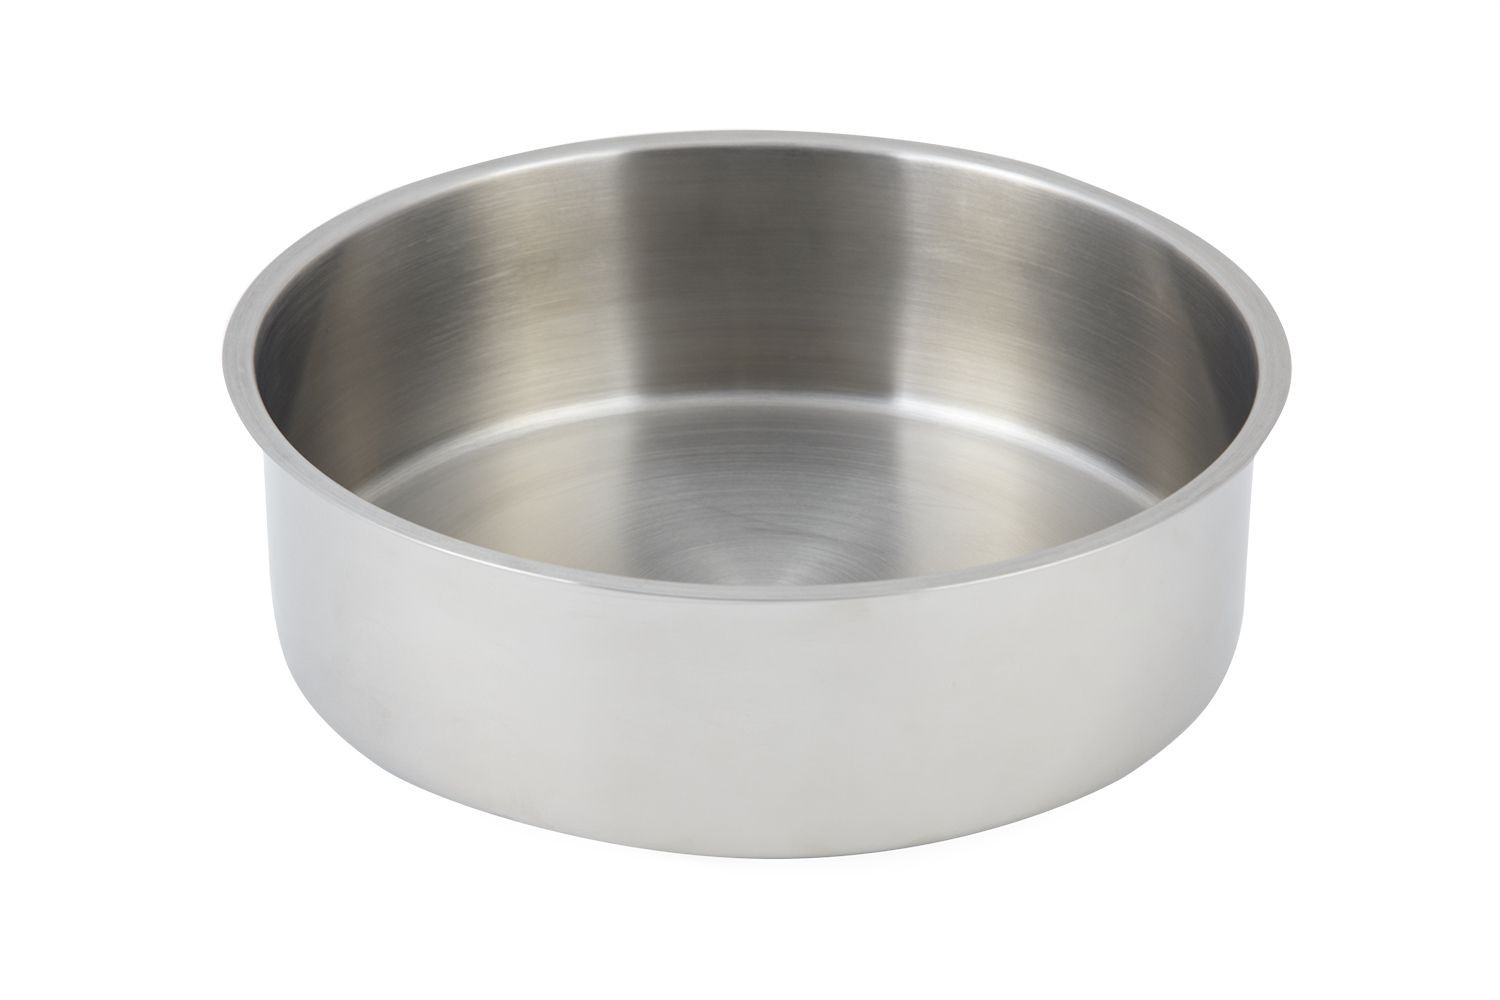 Bon Chef 12024 Stainless Steel Water Pan for Petite Chafers, 10 7/8" Dia., 3 1/4" H.